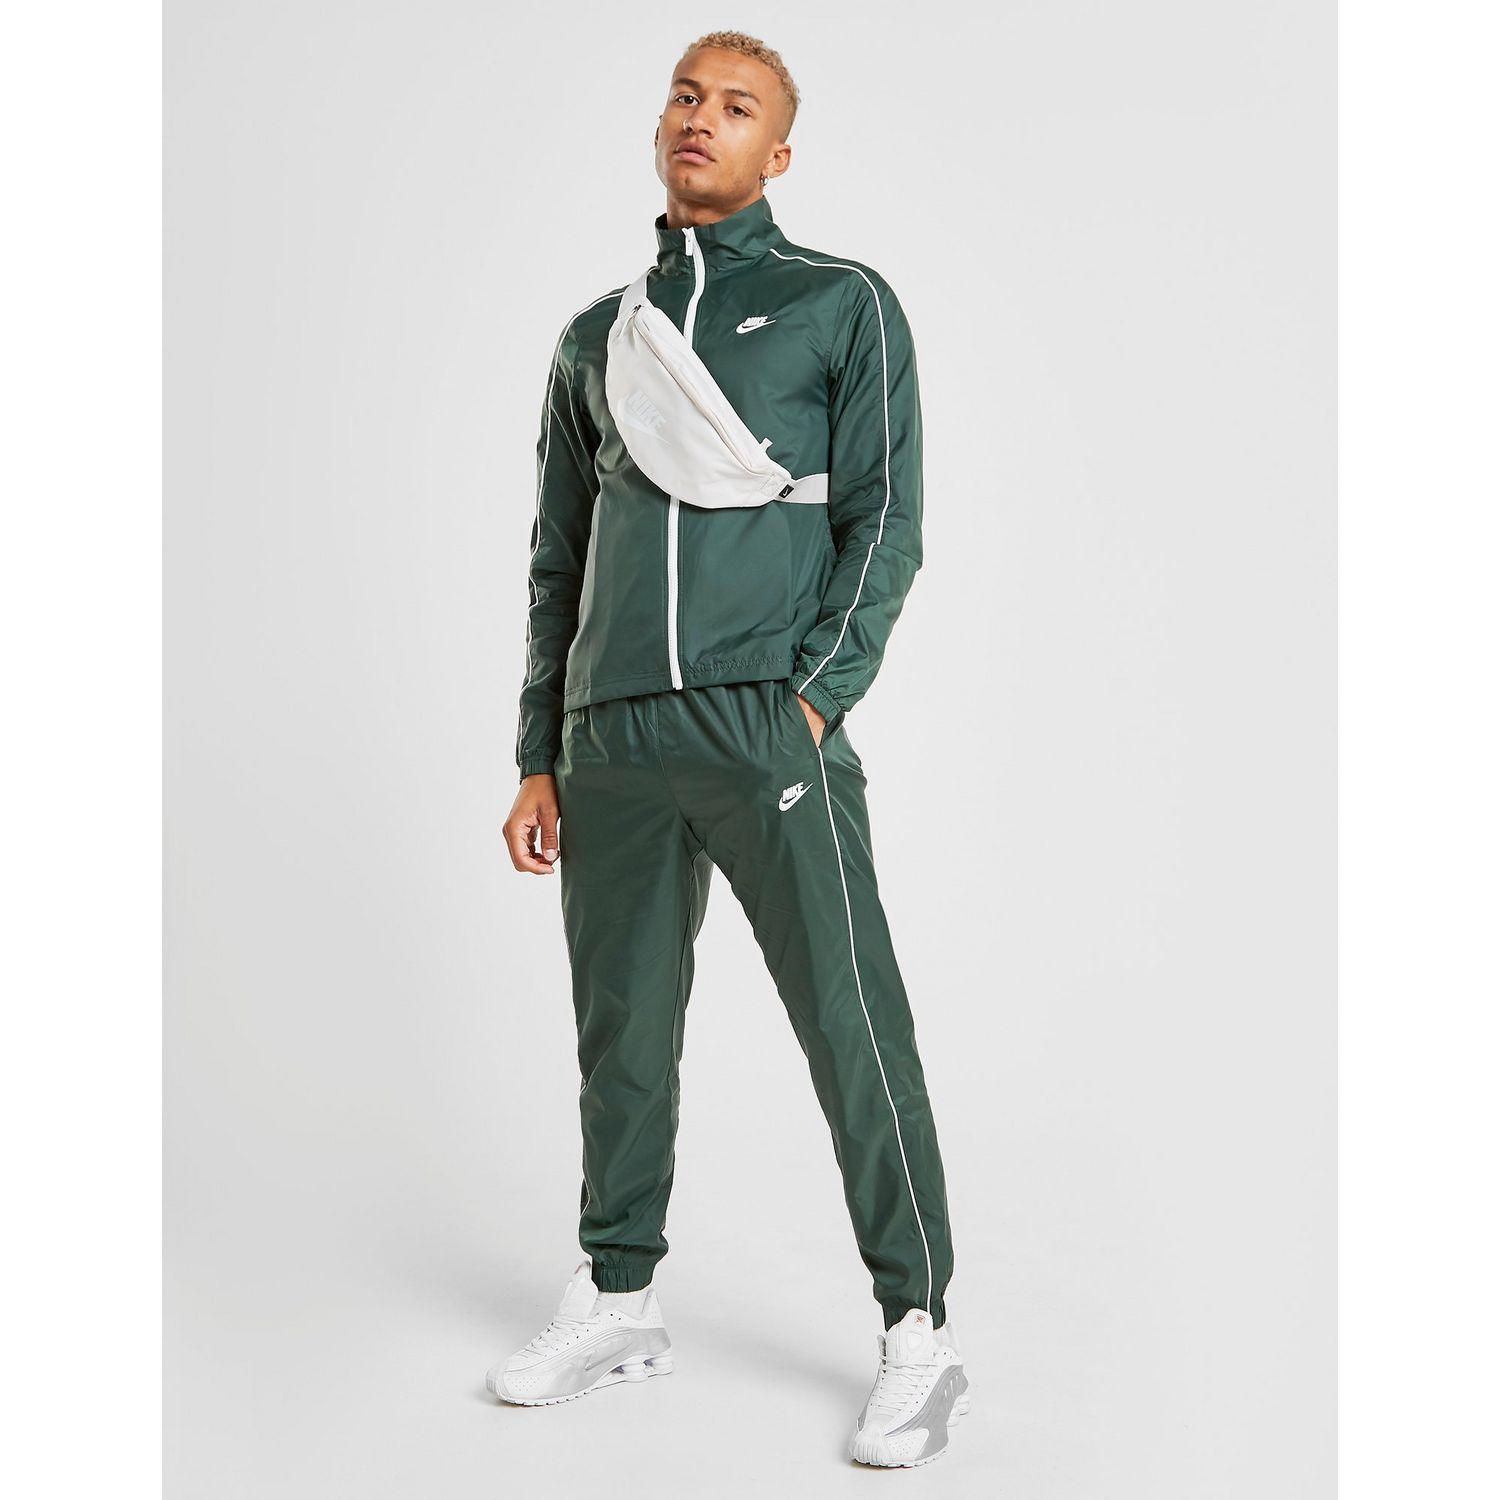 Nike Synthetic Slayer Woven Tracksuit in Green/White (Green) for Men - Lyst